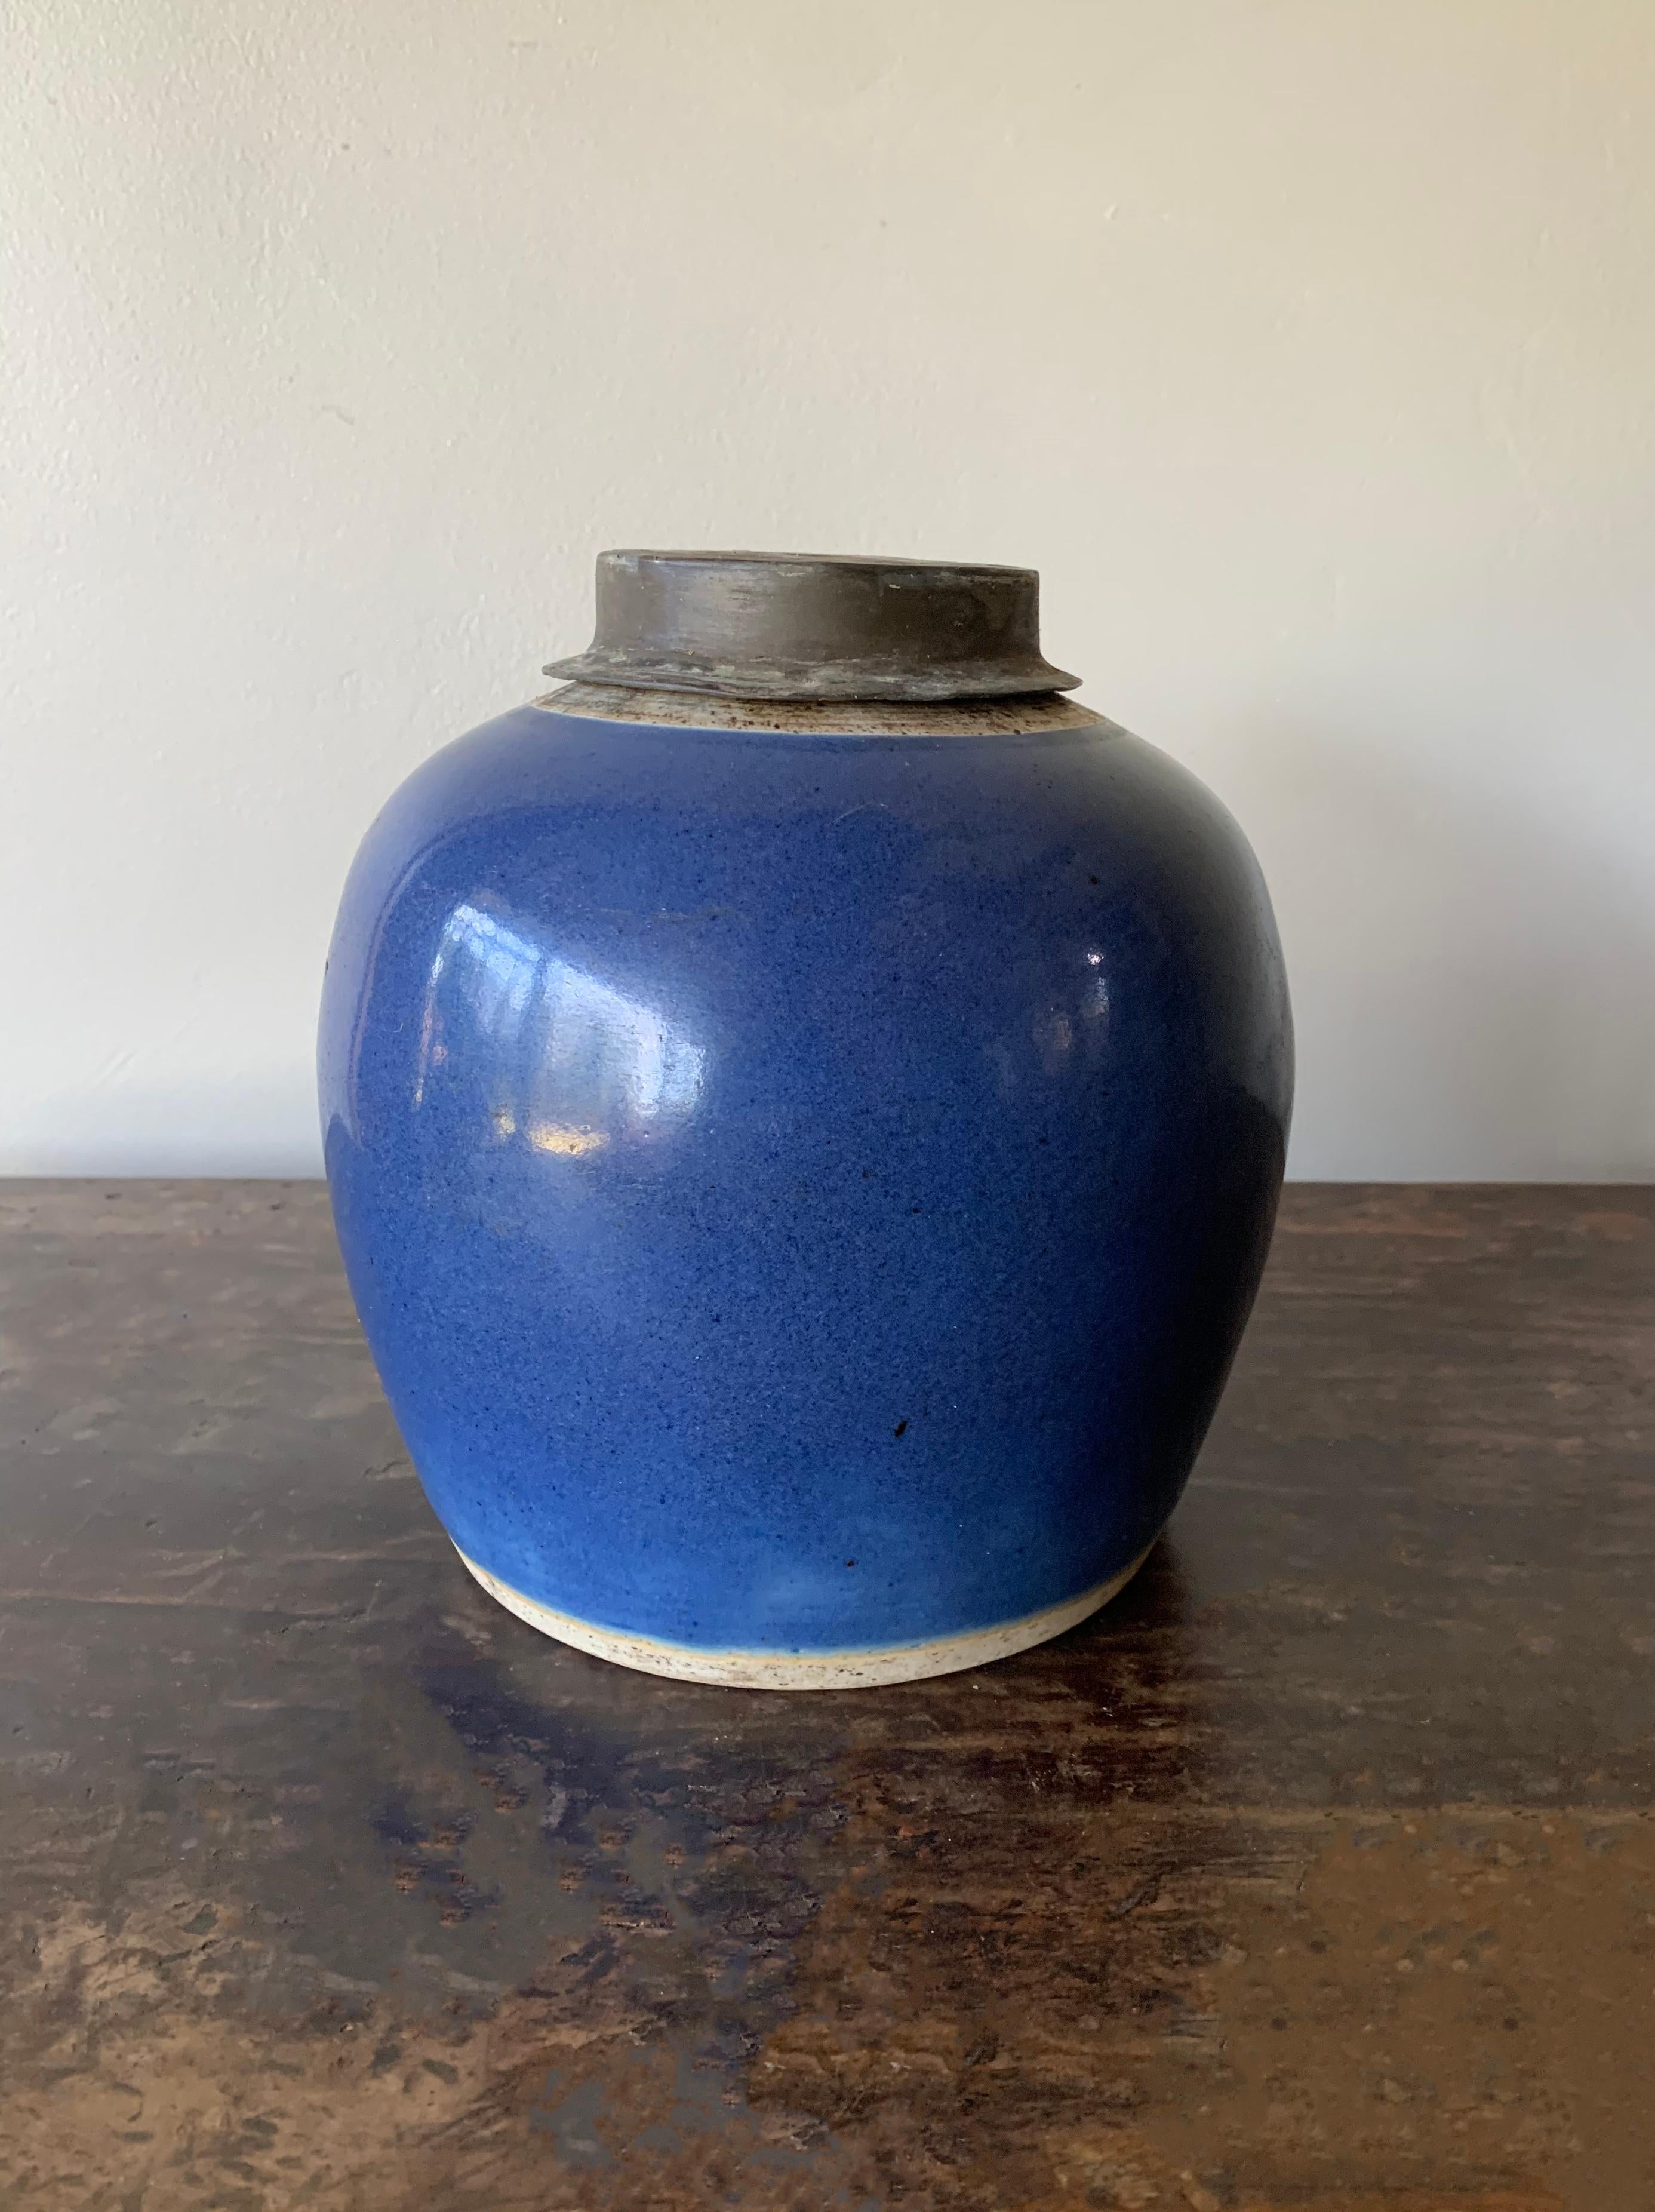 This is a blue Chinese ceramic ginger jar with metal top dating to the early 20th century 

Dimensions: Height 18.5cm diameter 17cm.
  